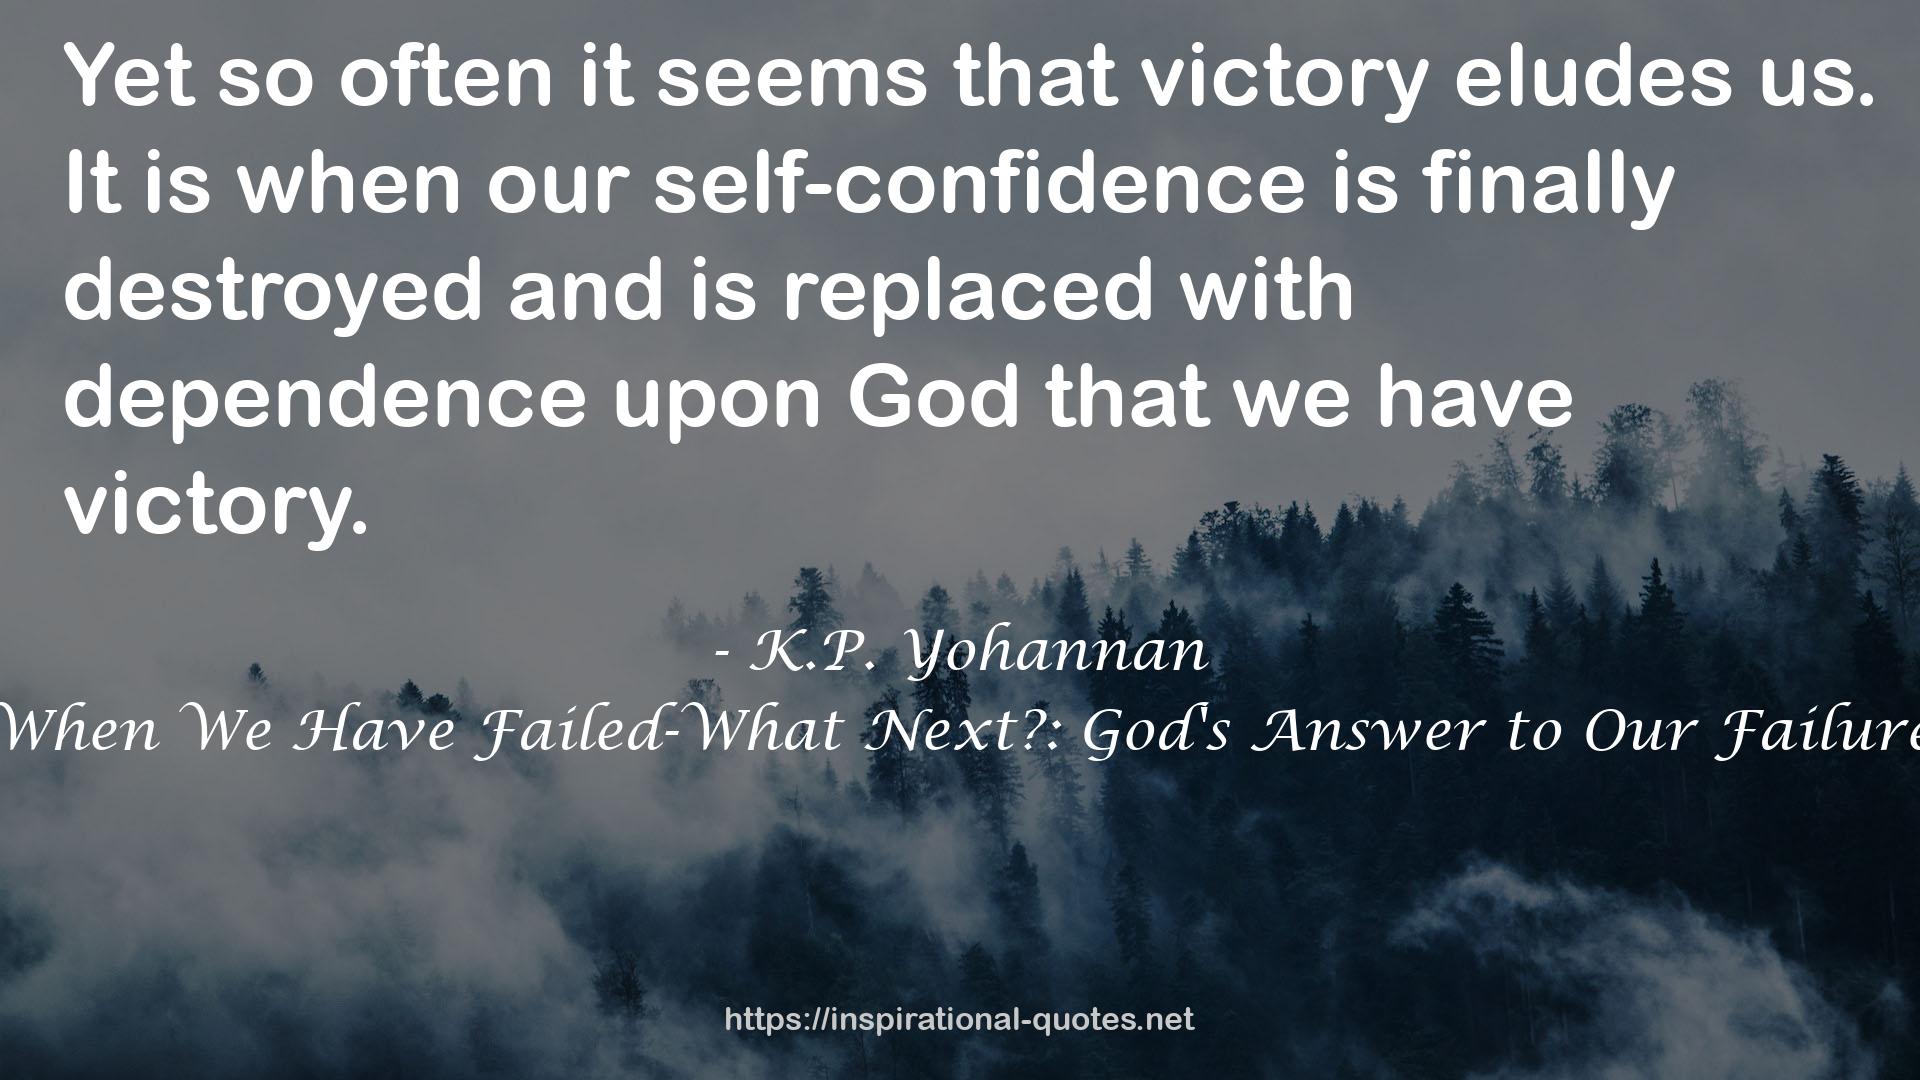 When We Have Failed-What Next?: God's Answer to Our Failure QUOTES